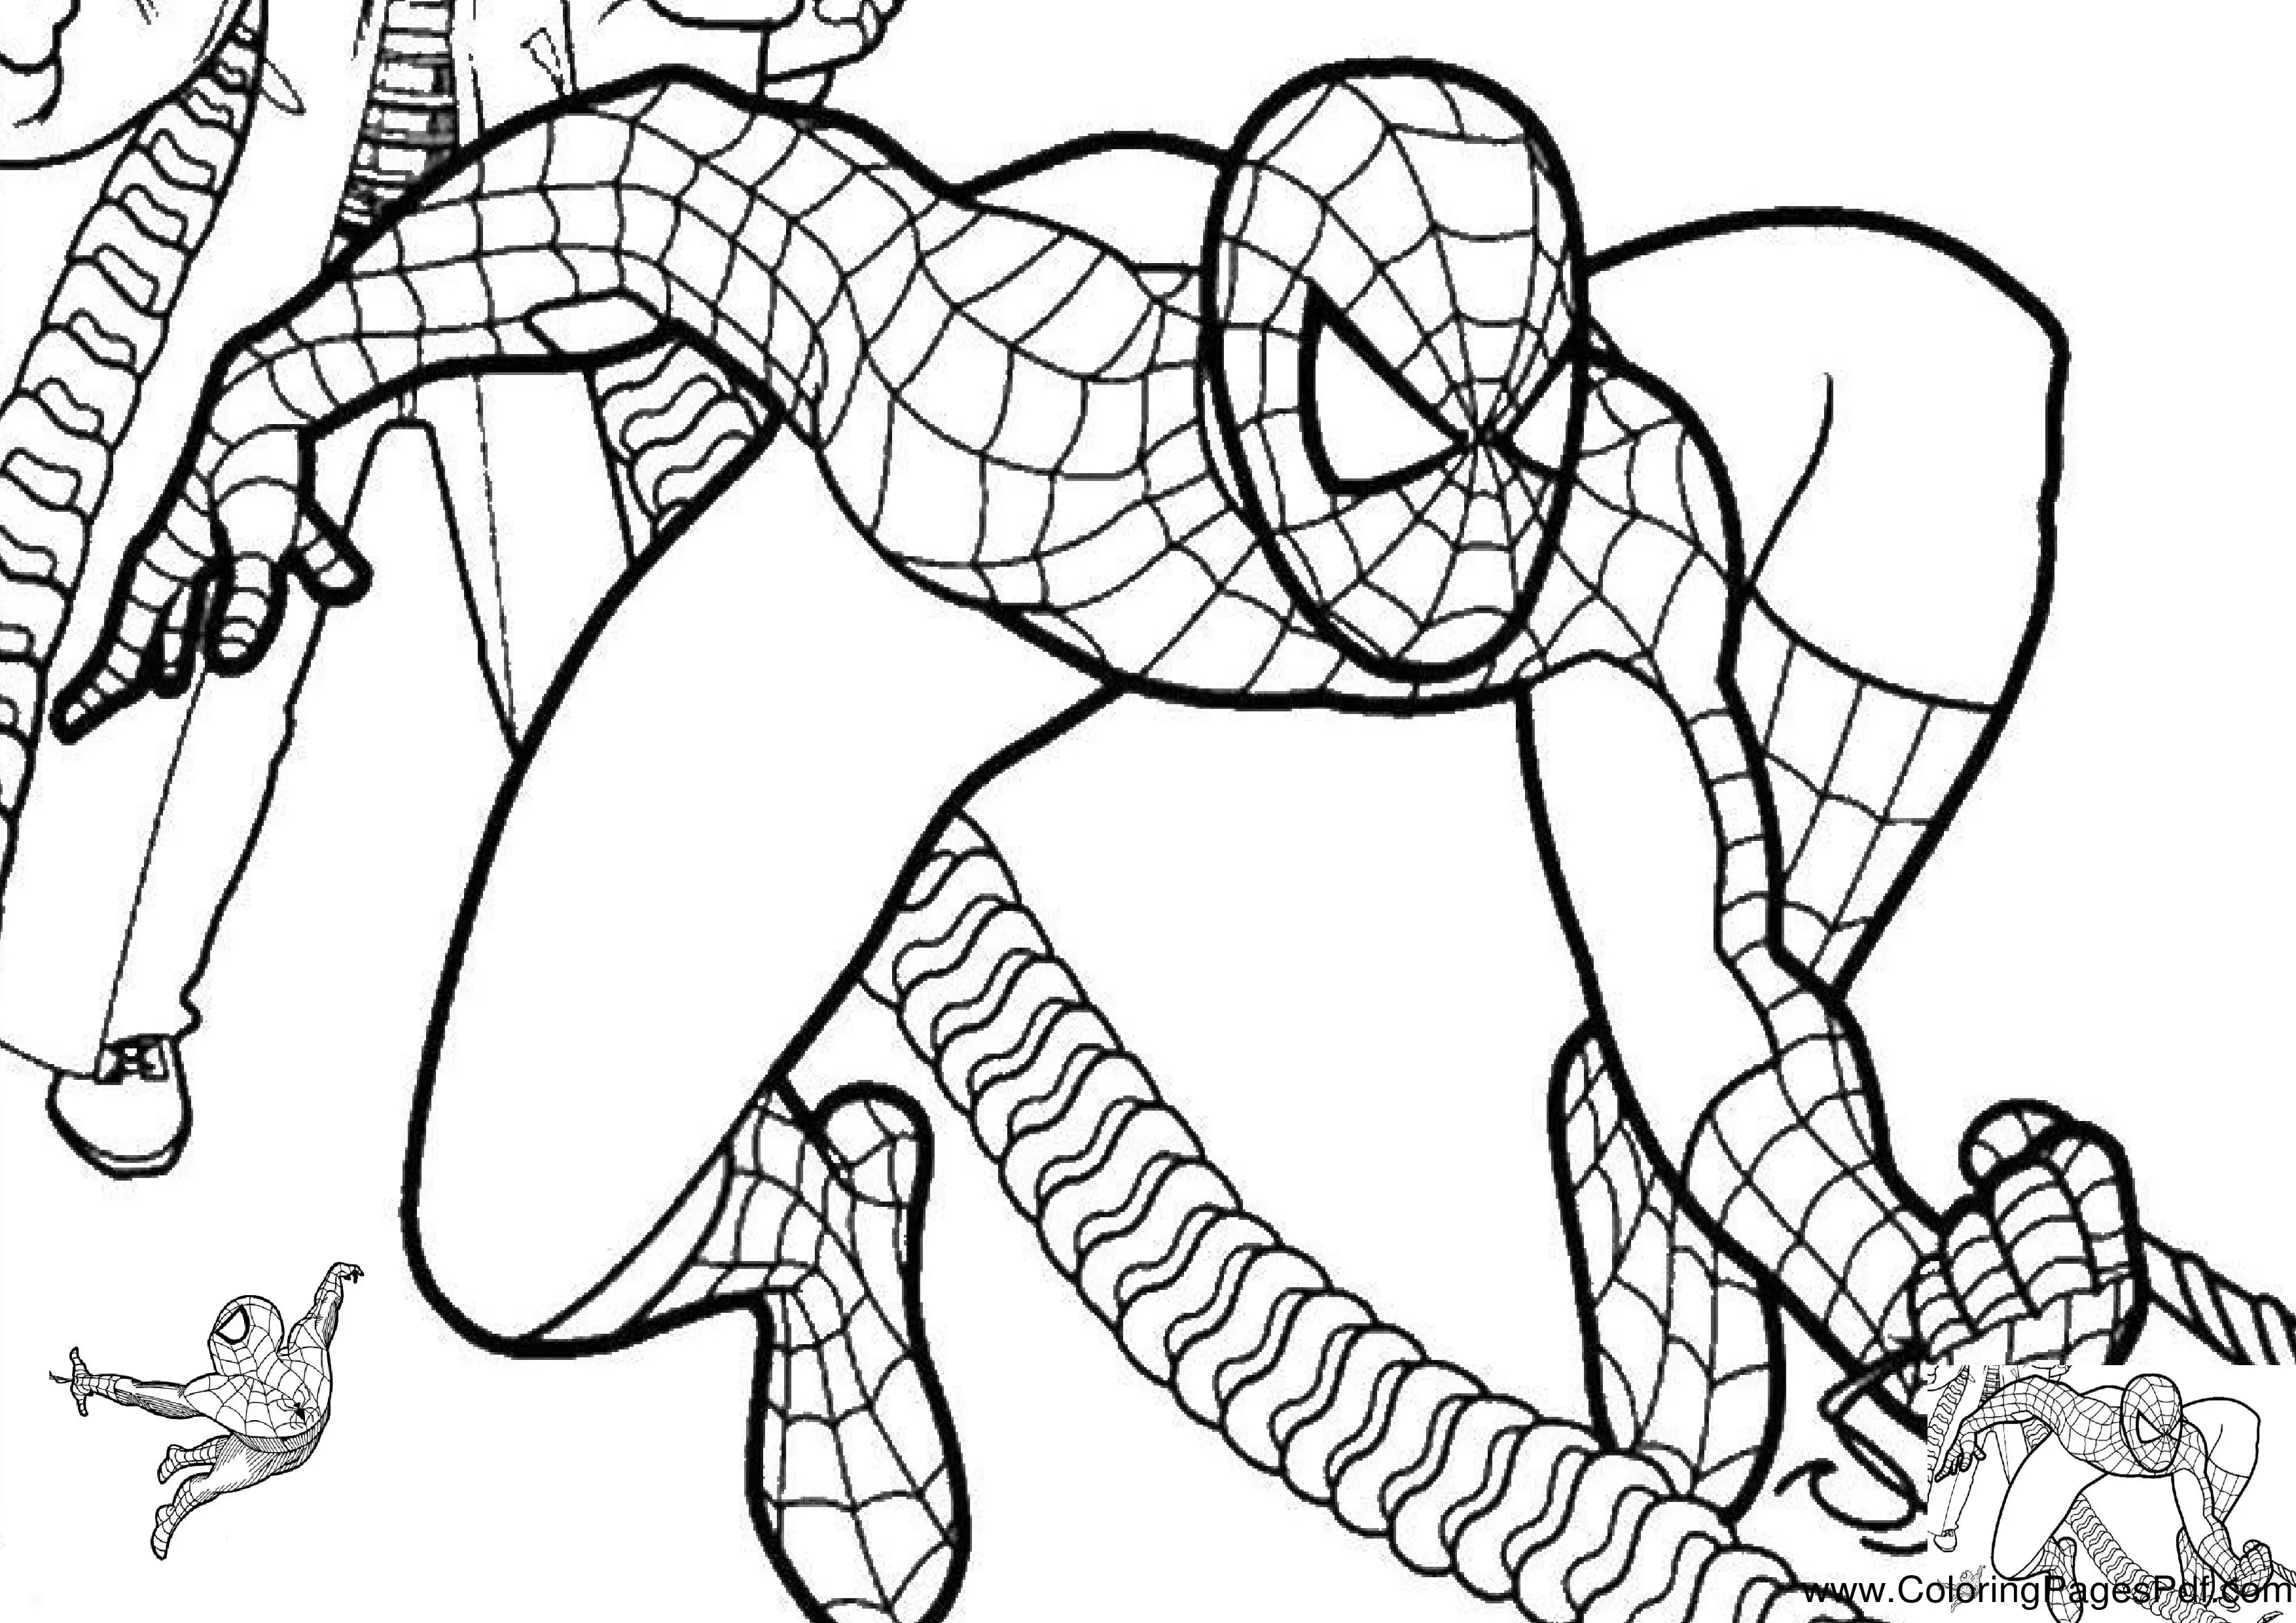 Coloring sheets of spiderman